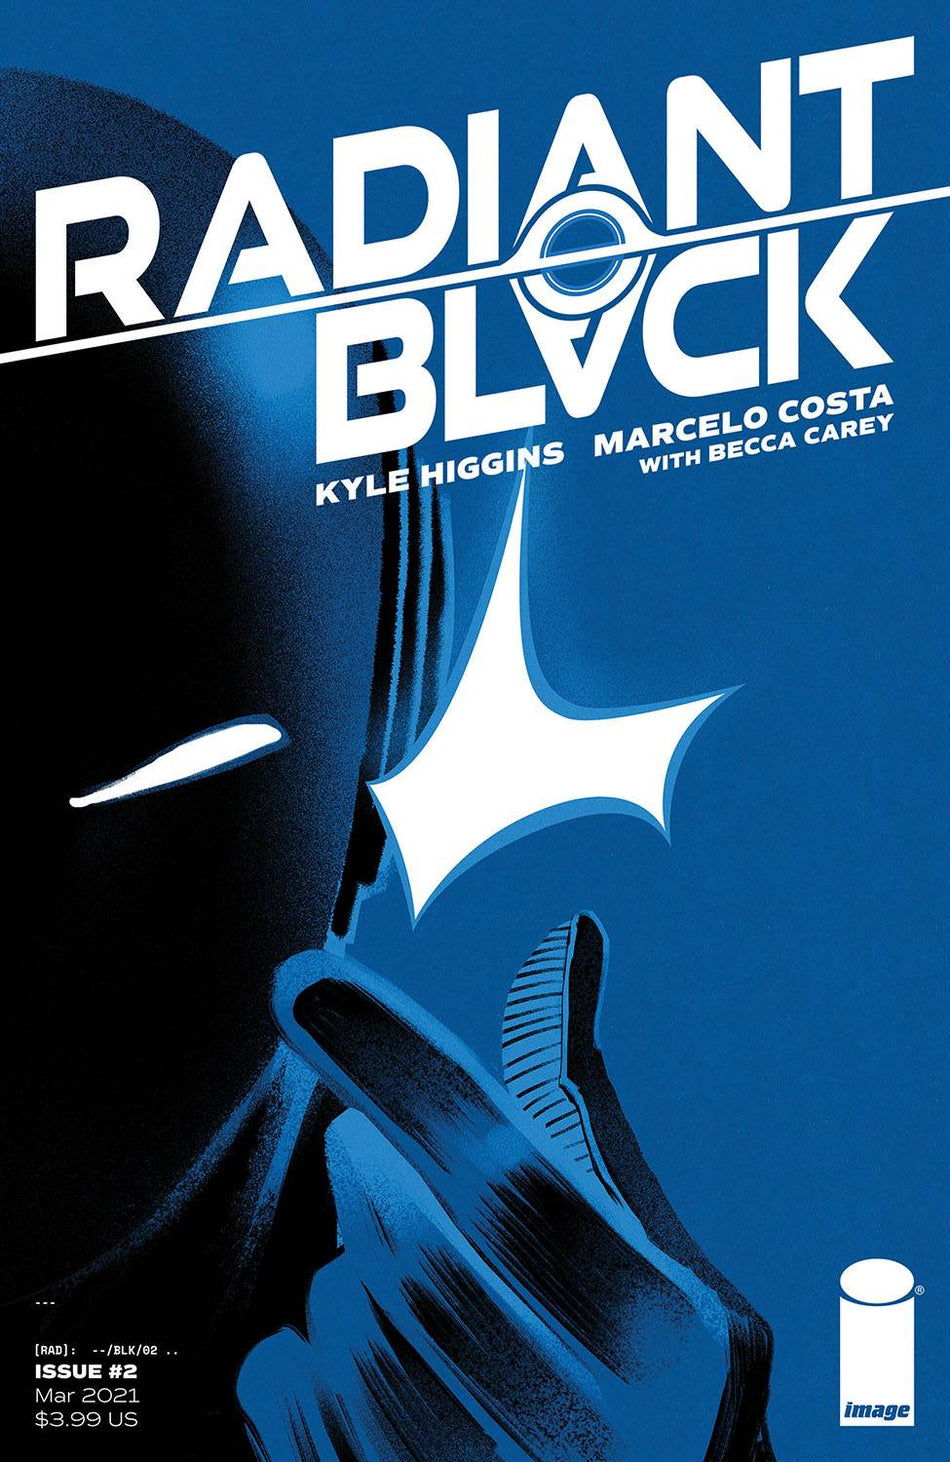 Photo of Radiant Black Issue 2A Costa comic sold by Stronghold Collectibles